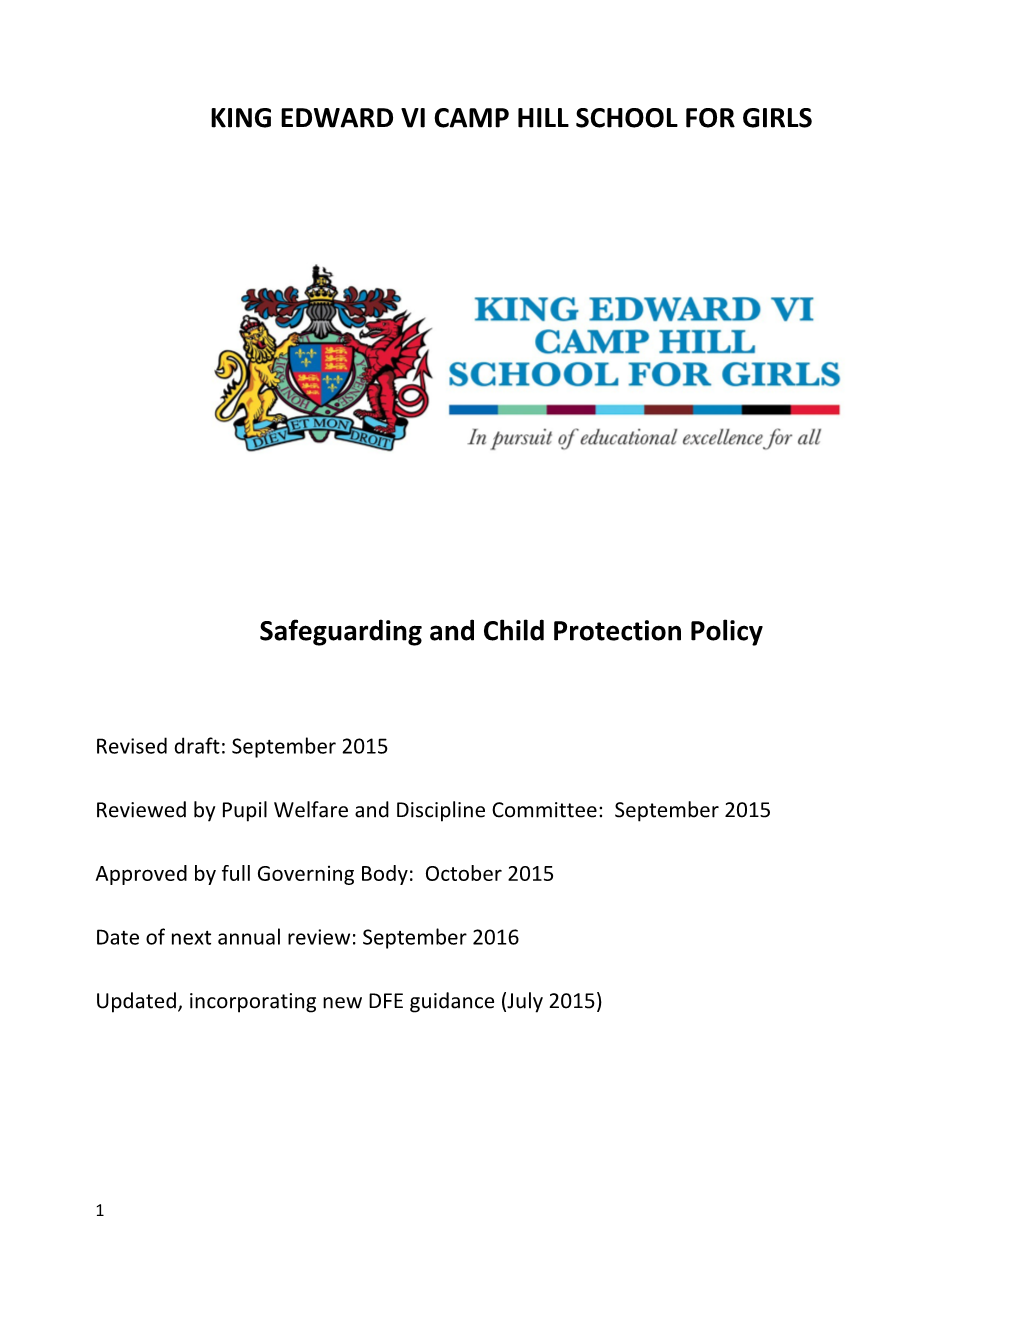 Child Protection Policy Review Jan 2010